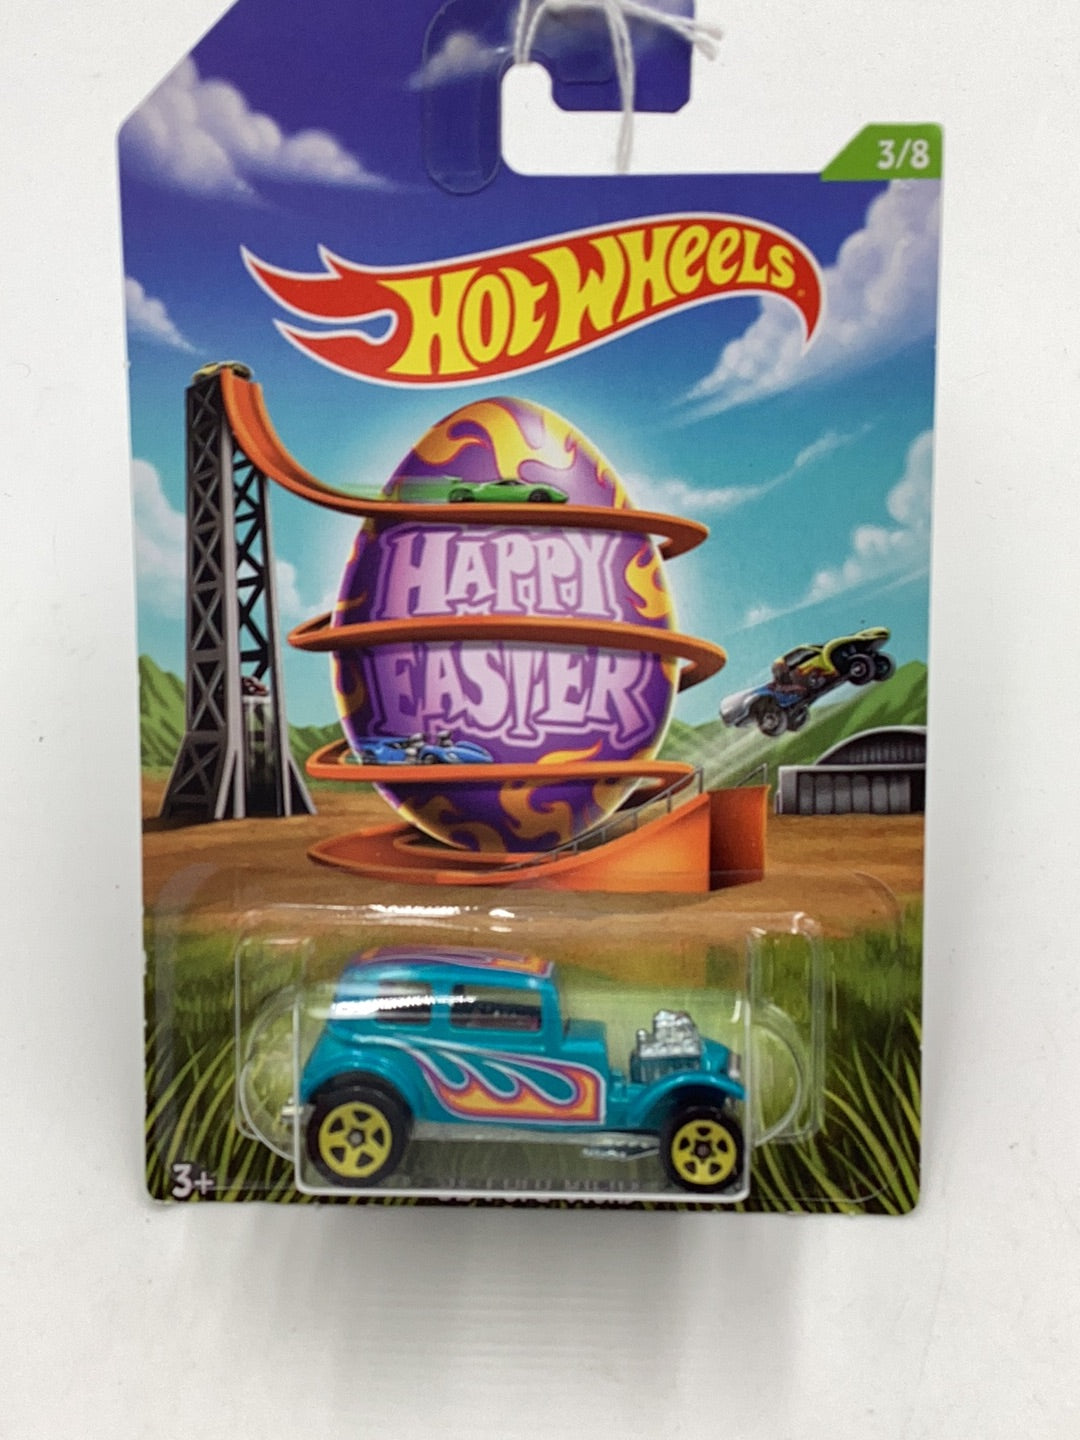 Hot wheels happy Easter 32 Ford Vicky 3/8 154i